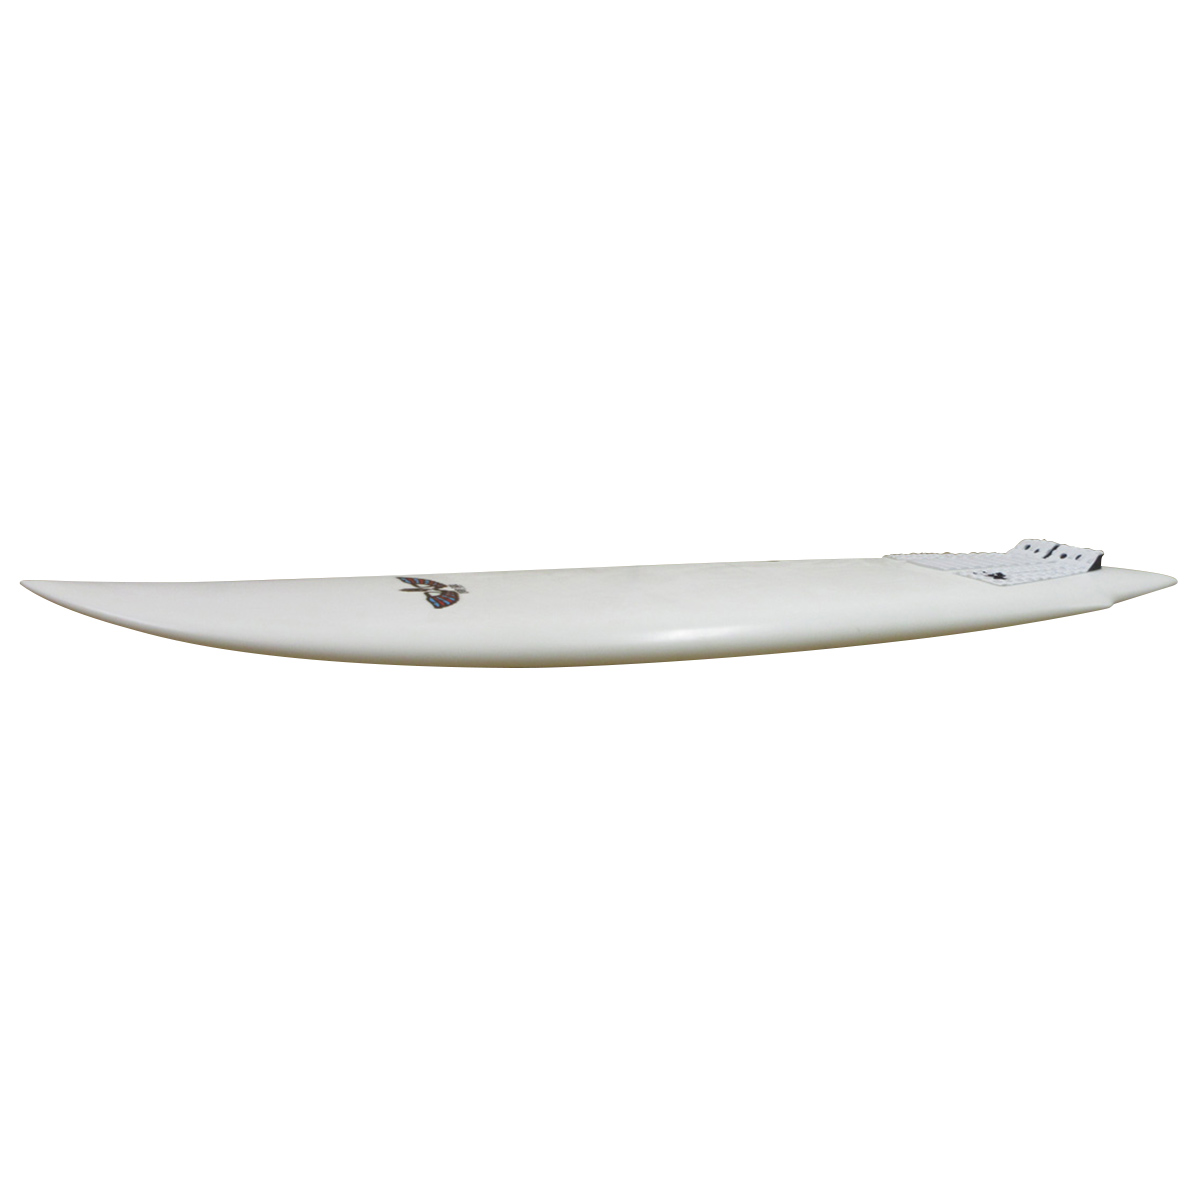 VONSOL SURFBOARDS / SPACE KNIGHT 6`1 HD EPS